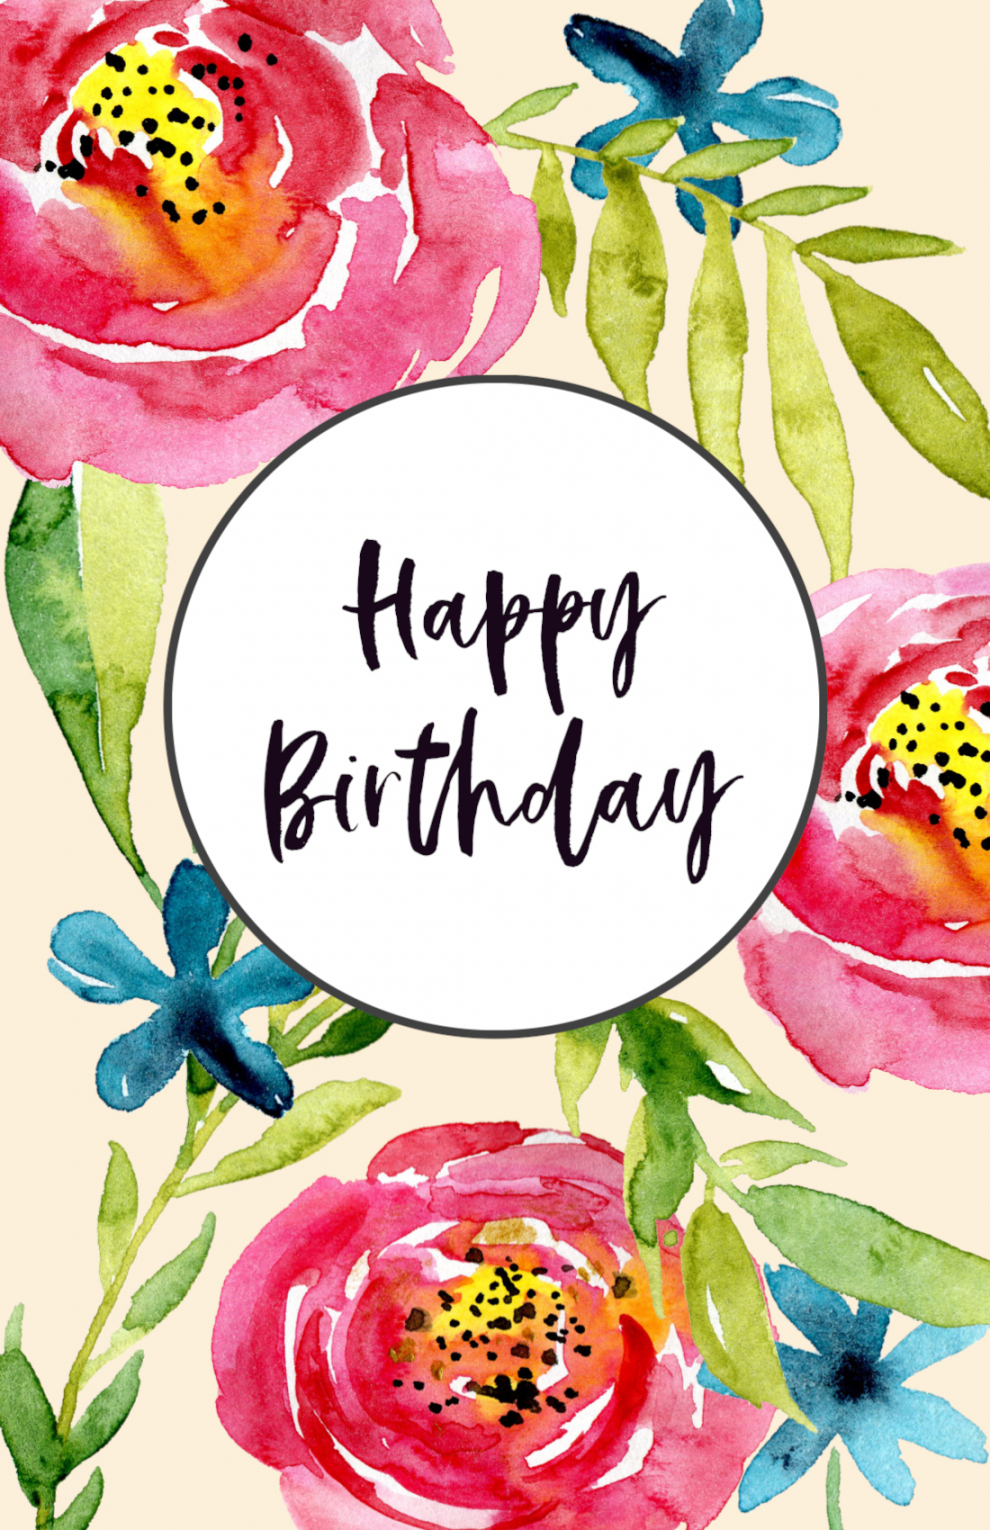 Free Printable Birthday Cards - Paper Trail Design - FREE Printables - Free Printable Birthday Cards For Wife